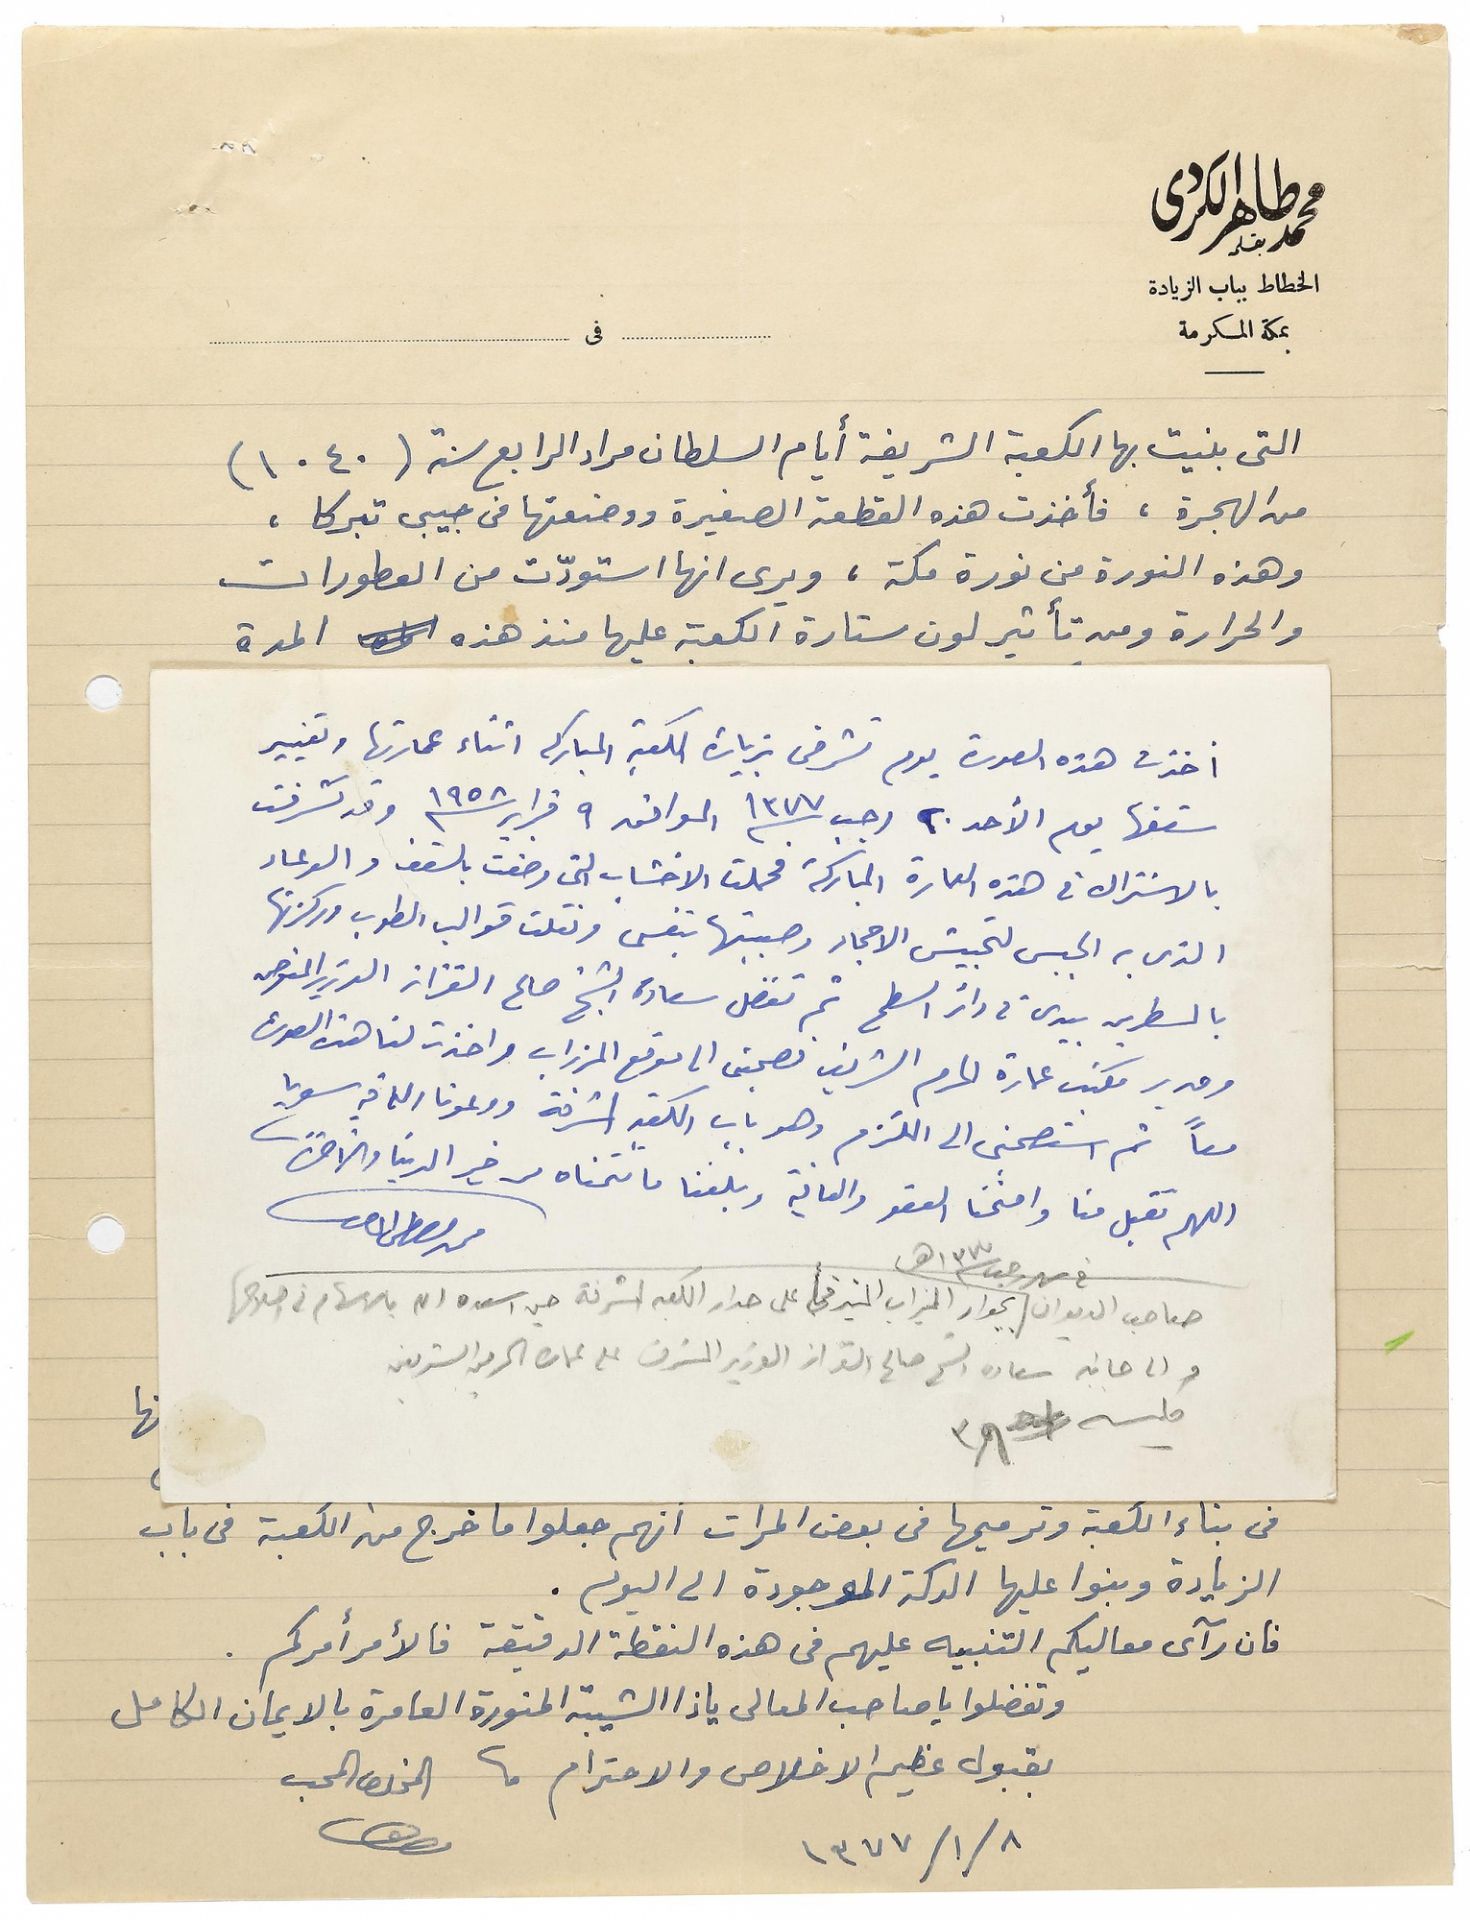 A RARE LETTER FROM THE MECCAN CALLIGRAPHIST MUHAMMAD TAHER AL-KURDI TO HIS EXCELLENCY SHEIKH MUHAMMA - Image 2 of 4